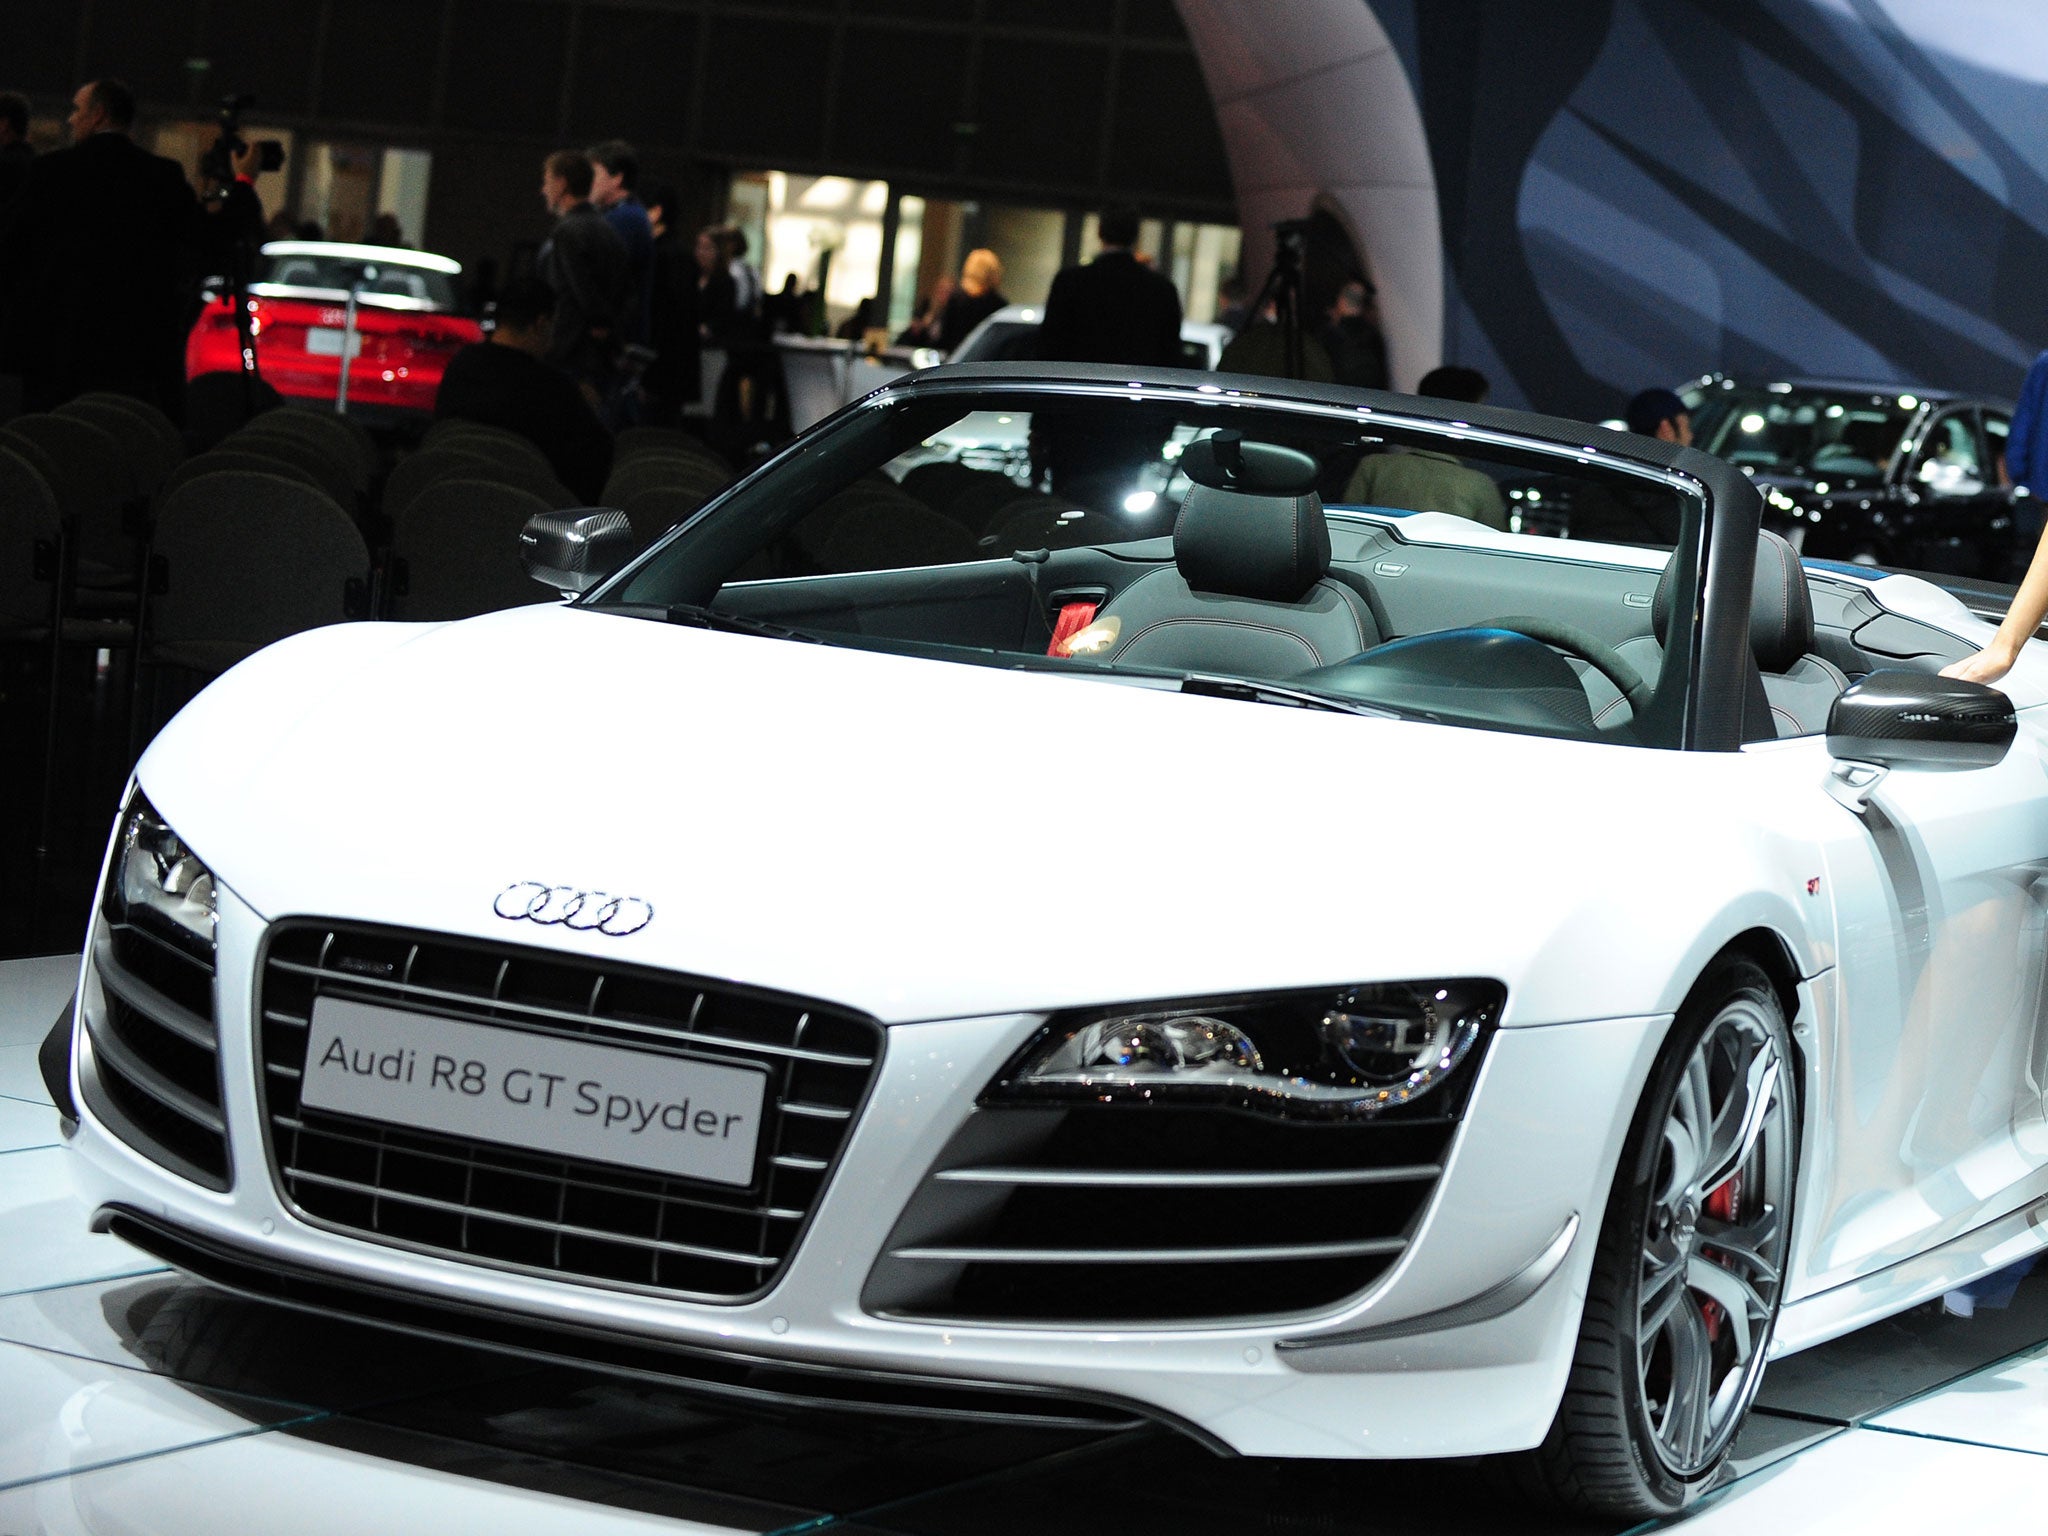 An Audi R8 Spyder, the make of car used by Mr Mahmoon to top 164mph